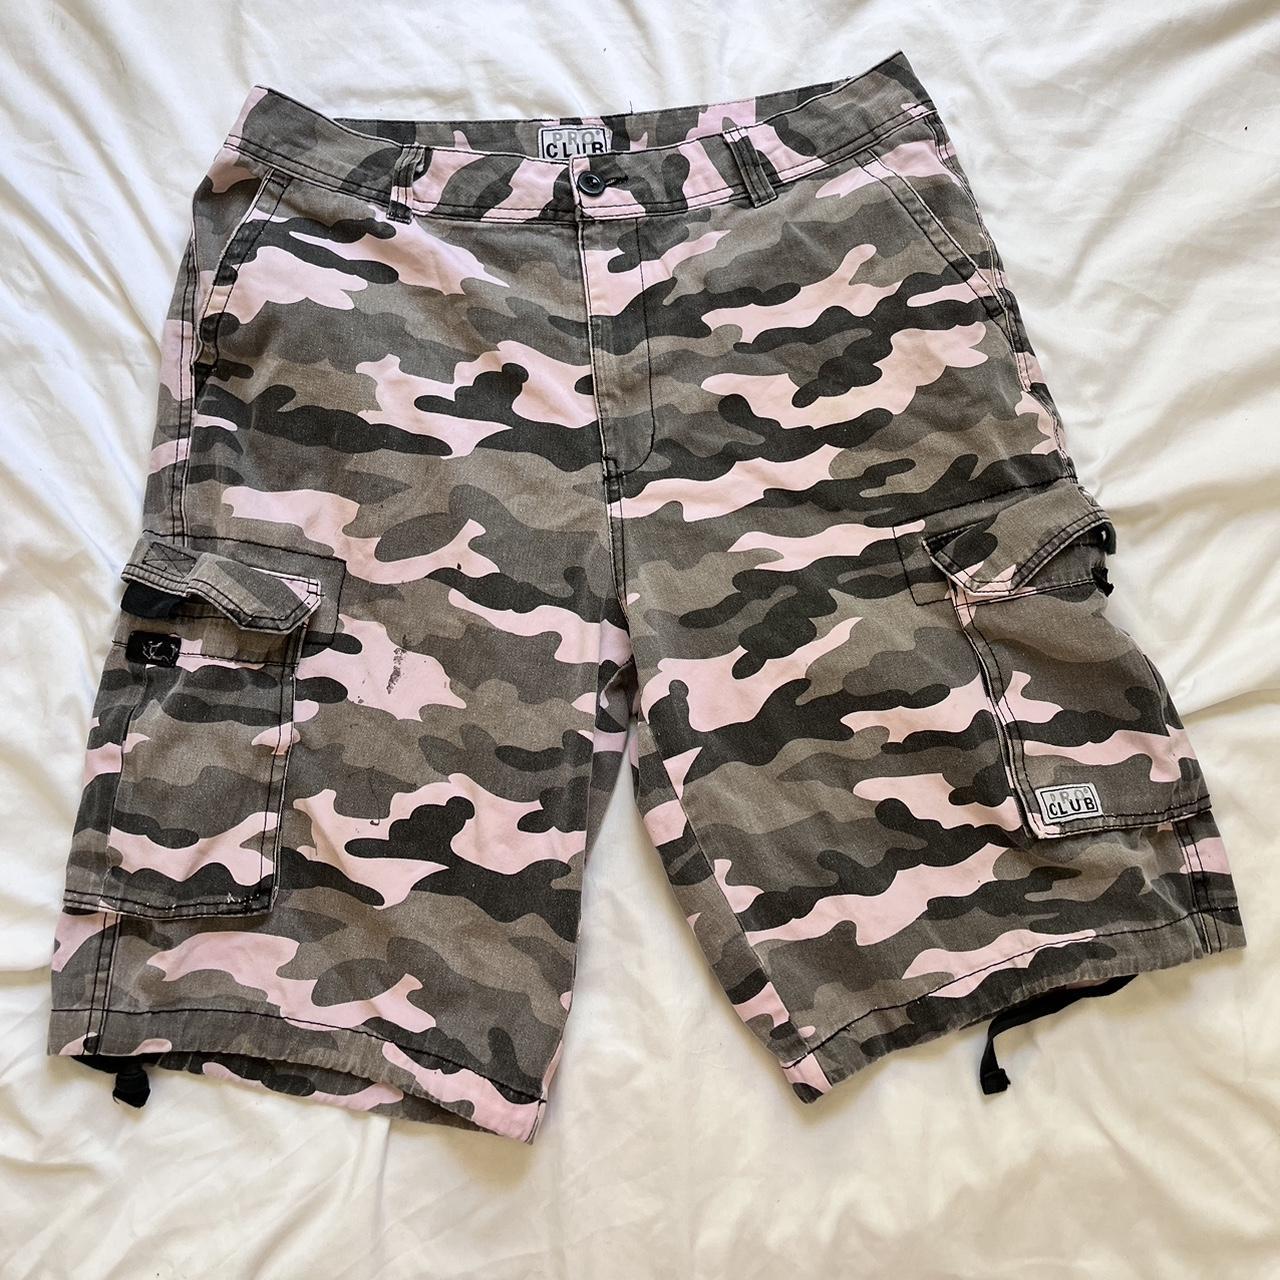 sick pink camo baggy jorts these are so cool the... - Depop